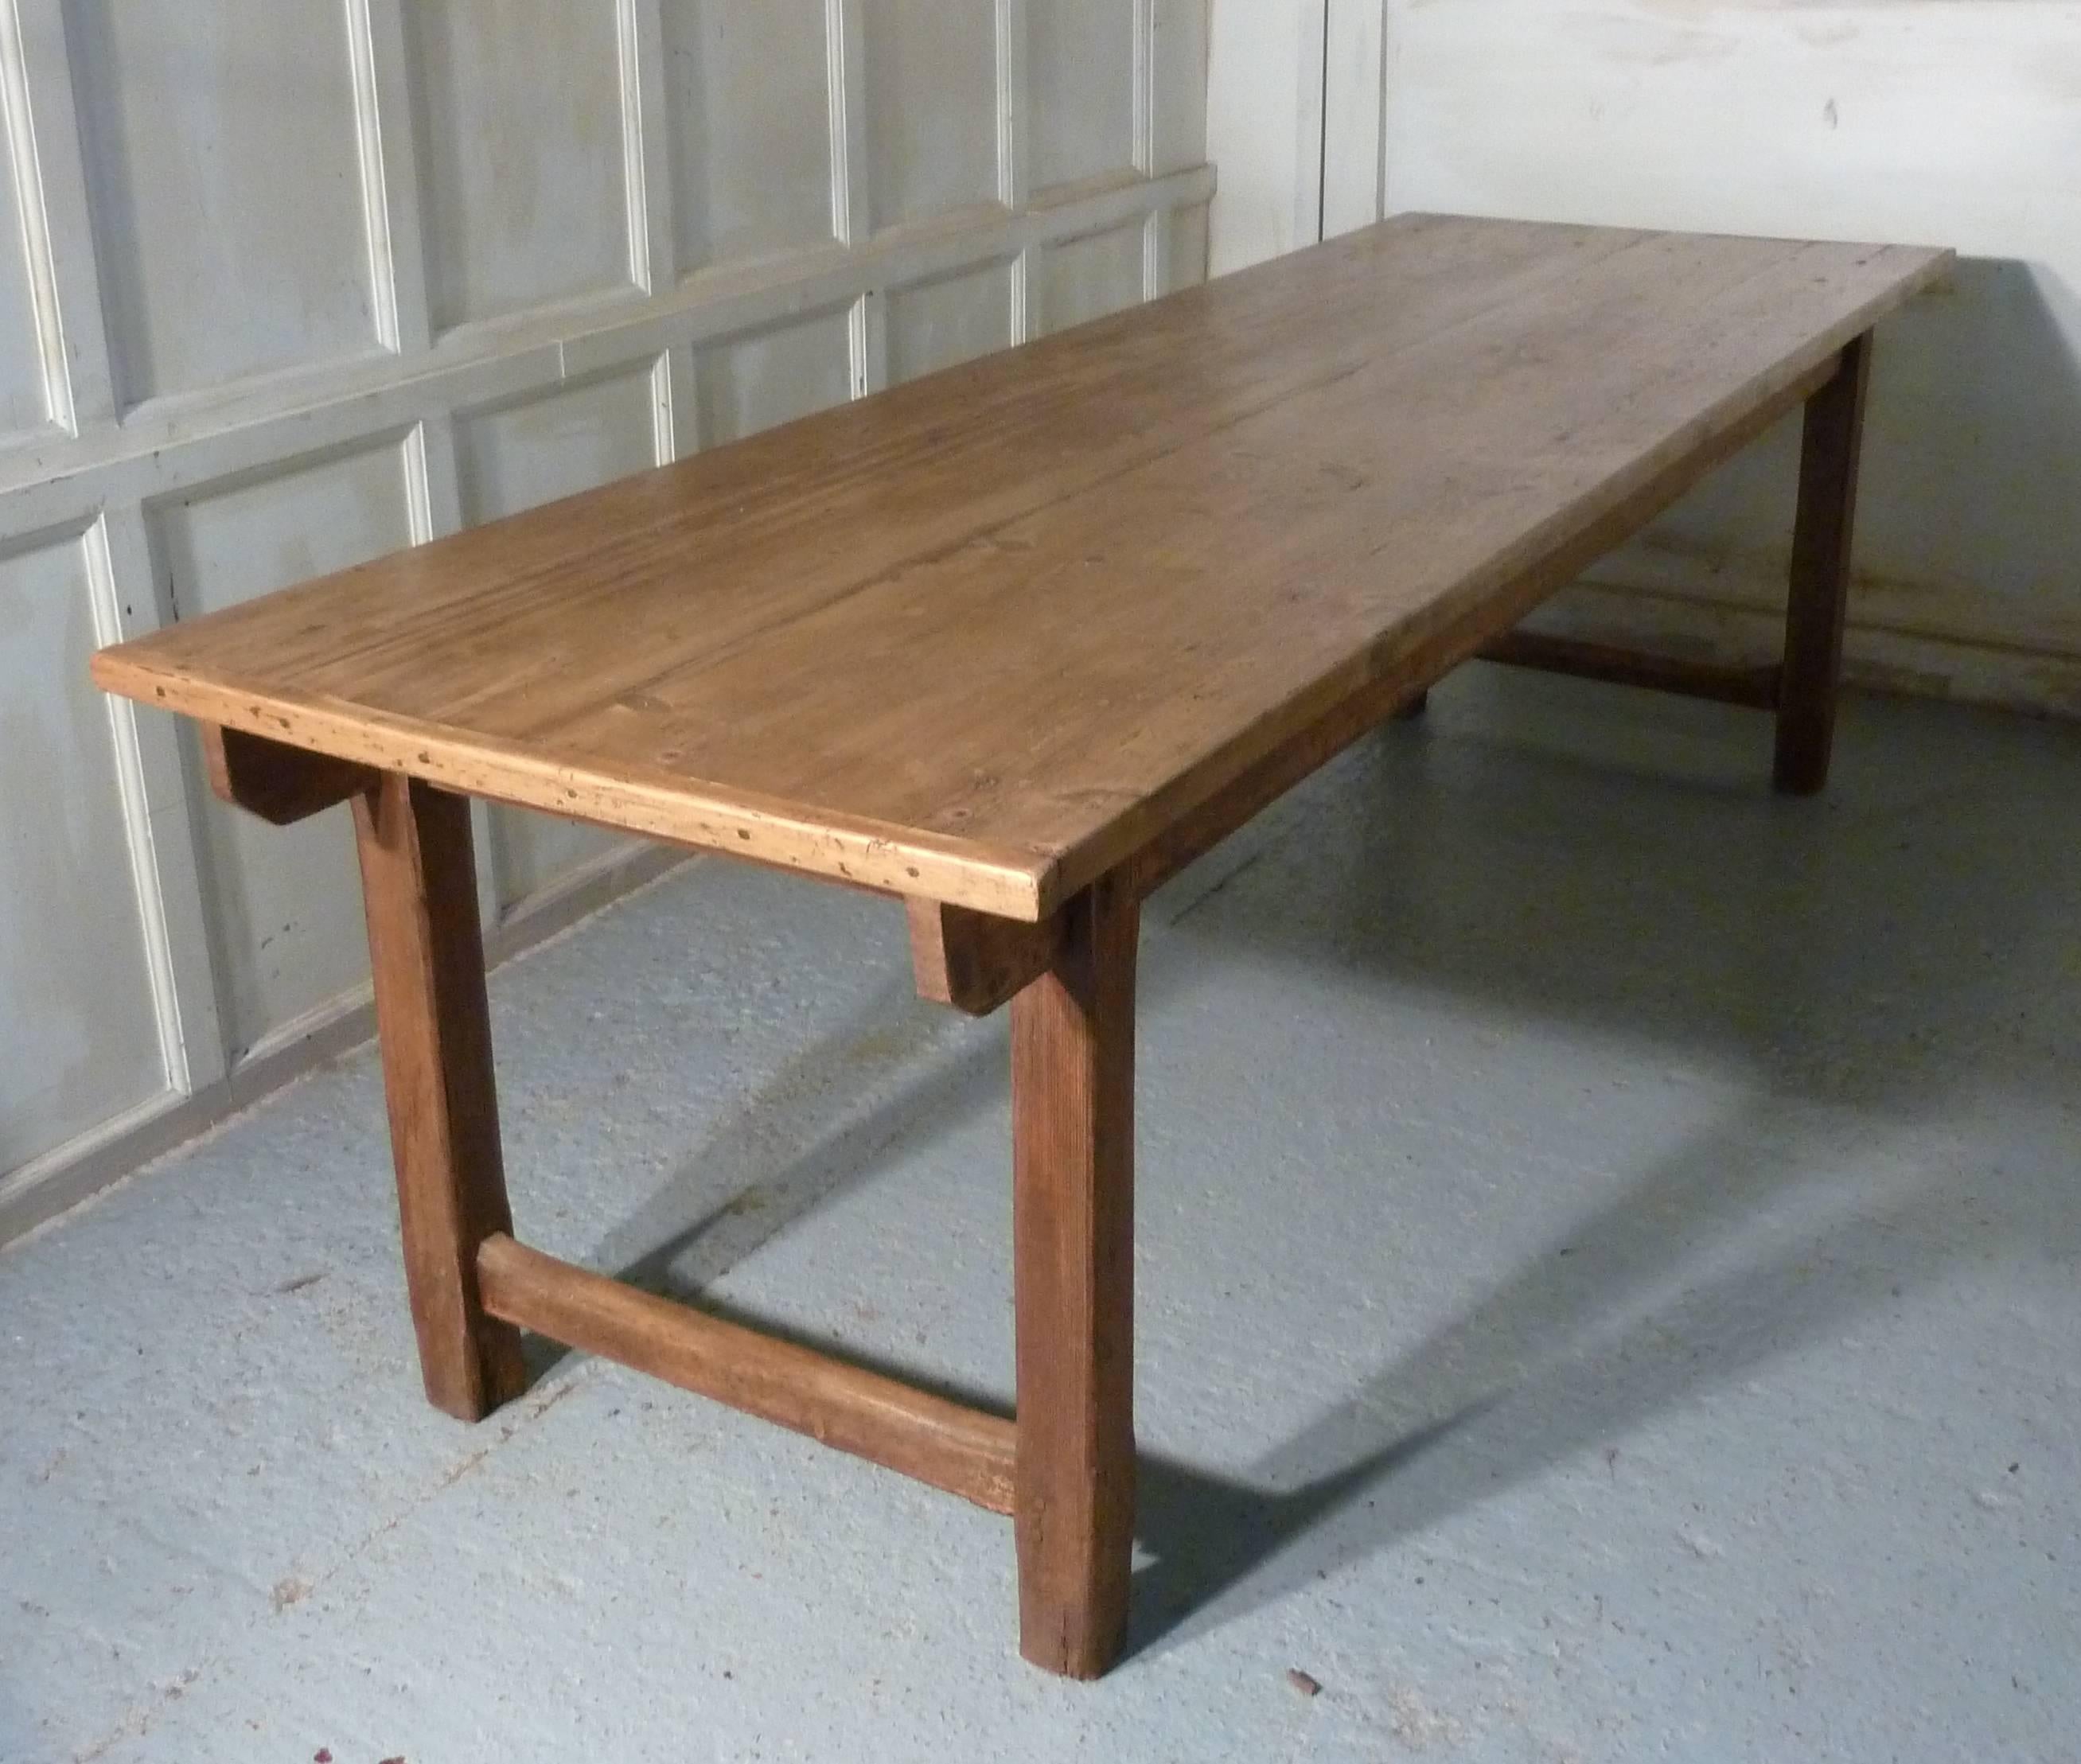 Large 19th Century French Rustic Pine Table, Cleated 2 Plank Farmhouse Top 1